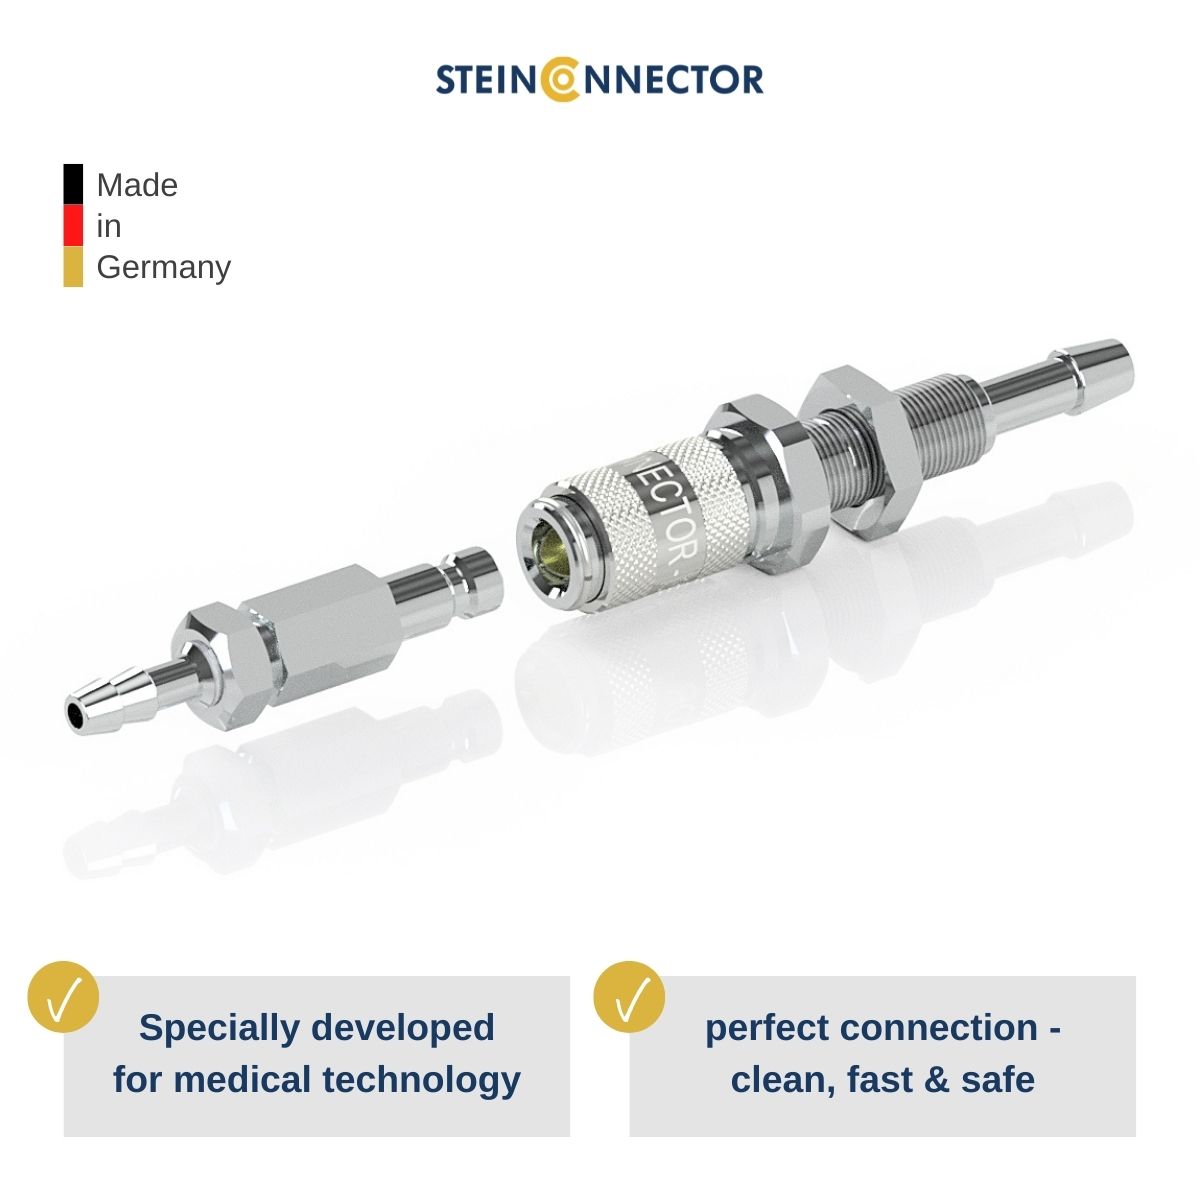 STEINCONNECTOR Medical couplings specially developed for medical devices & equipment - Premium Quality Made in Germany